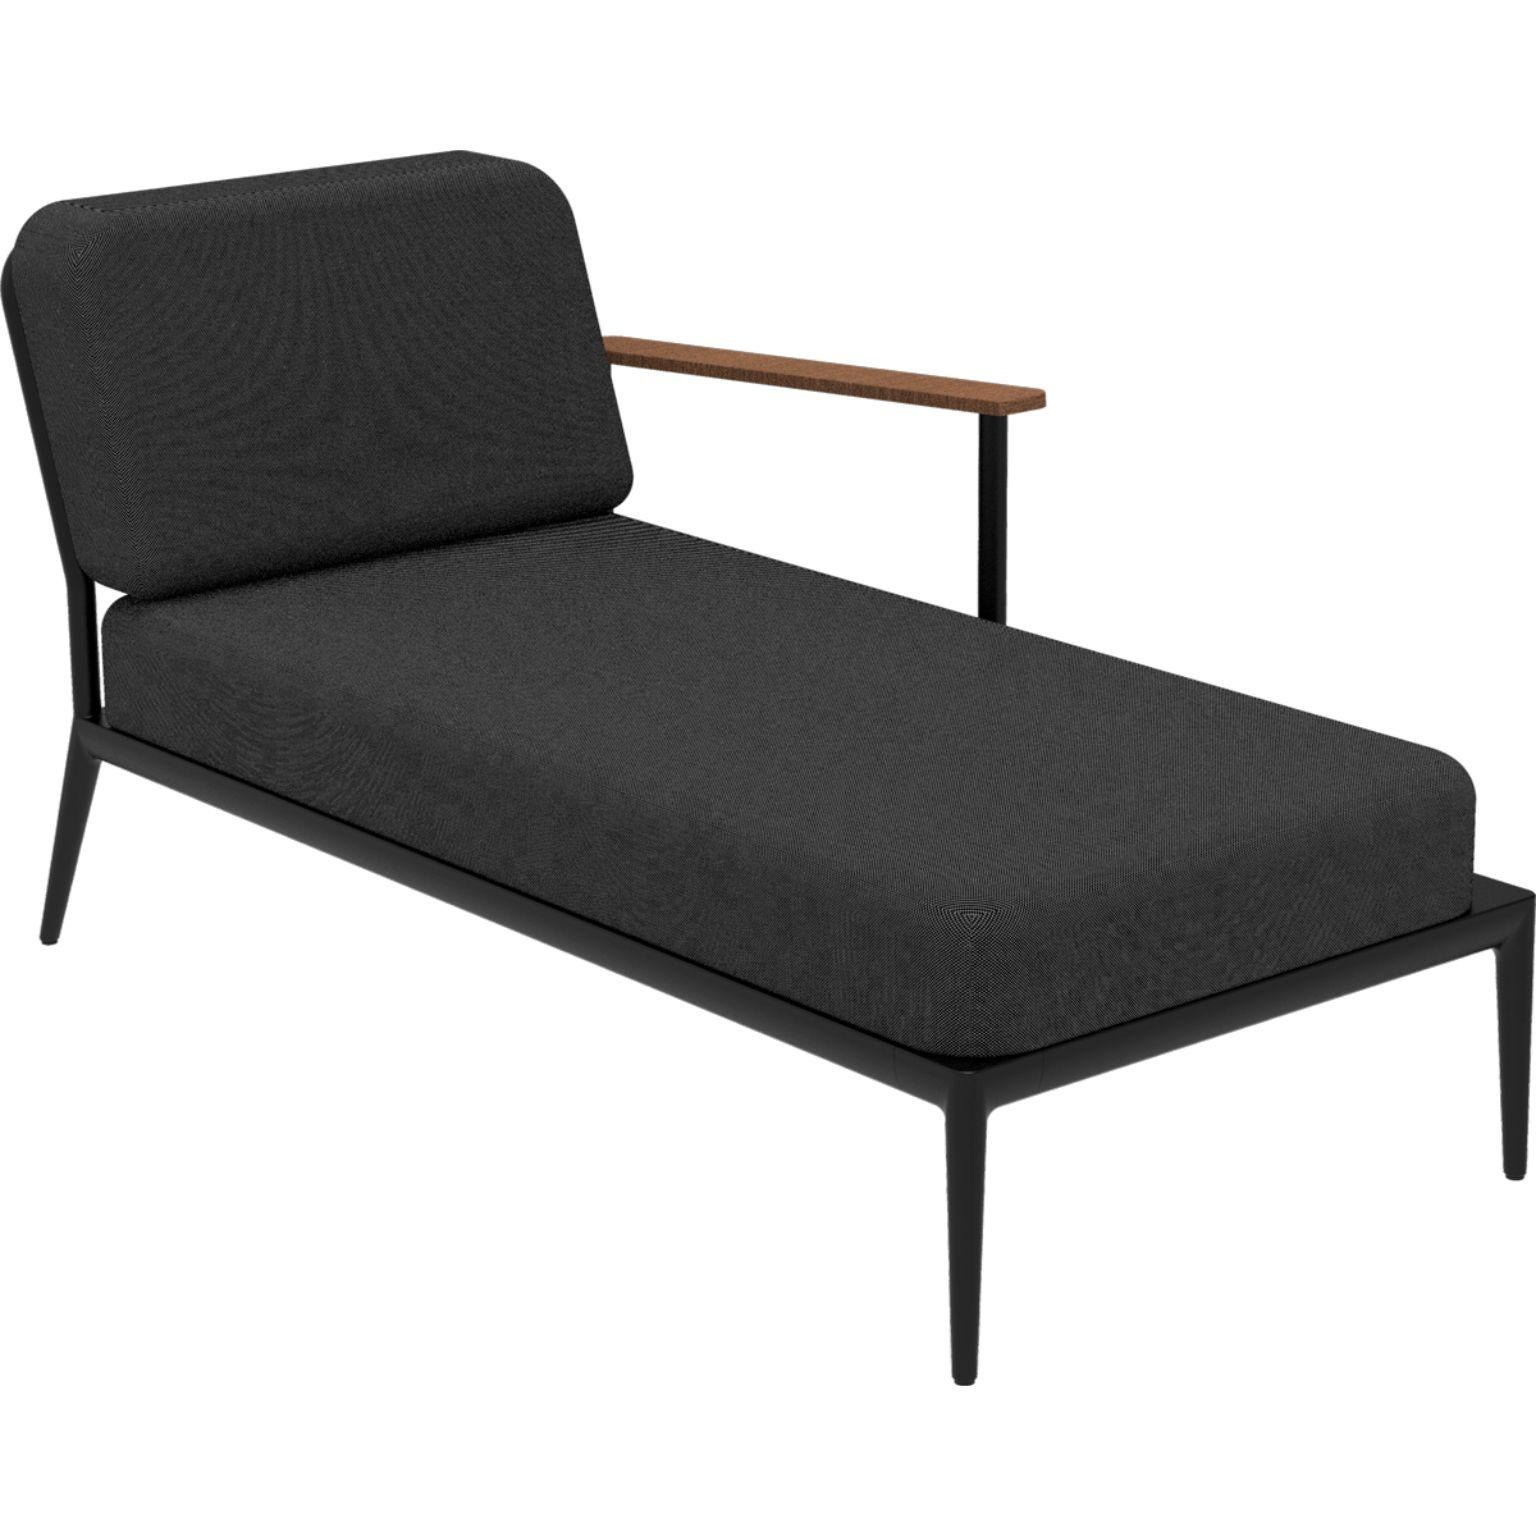 Nature Black Left Chaise longue by MOWEE
Dimensions: D155 x W76 x H81 cm (seat height 42 cm).
Material: Aluminum, upholstery and Iroko Wood.
Weight: 28 kg.
Also available in different colors and finishes.

An unmistakable collection for its